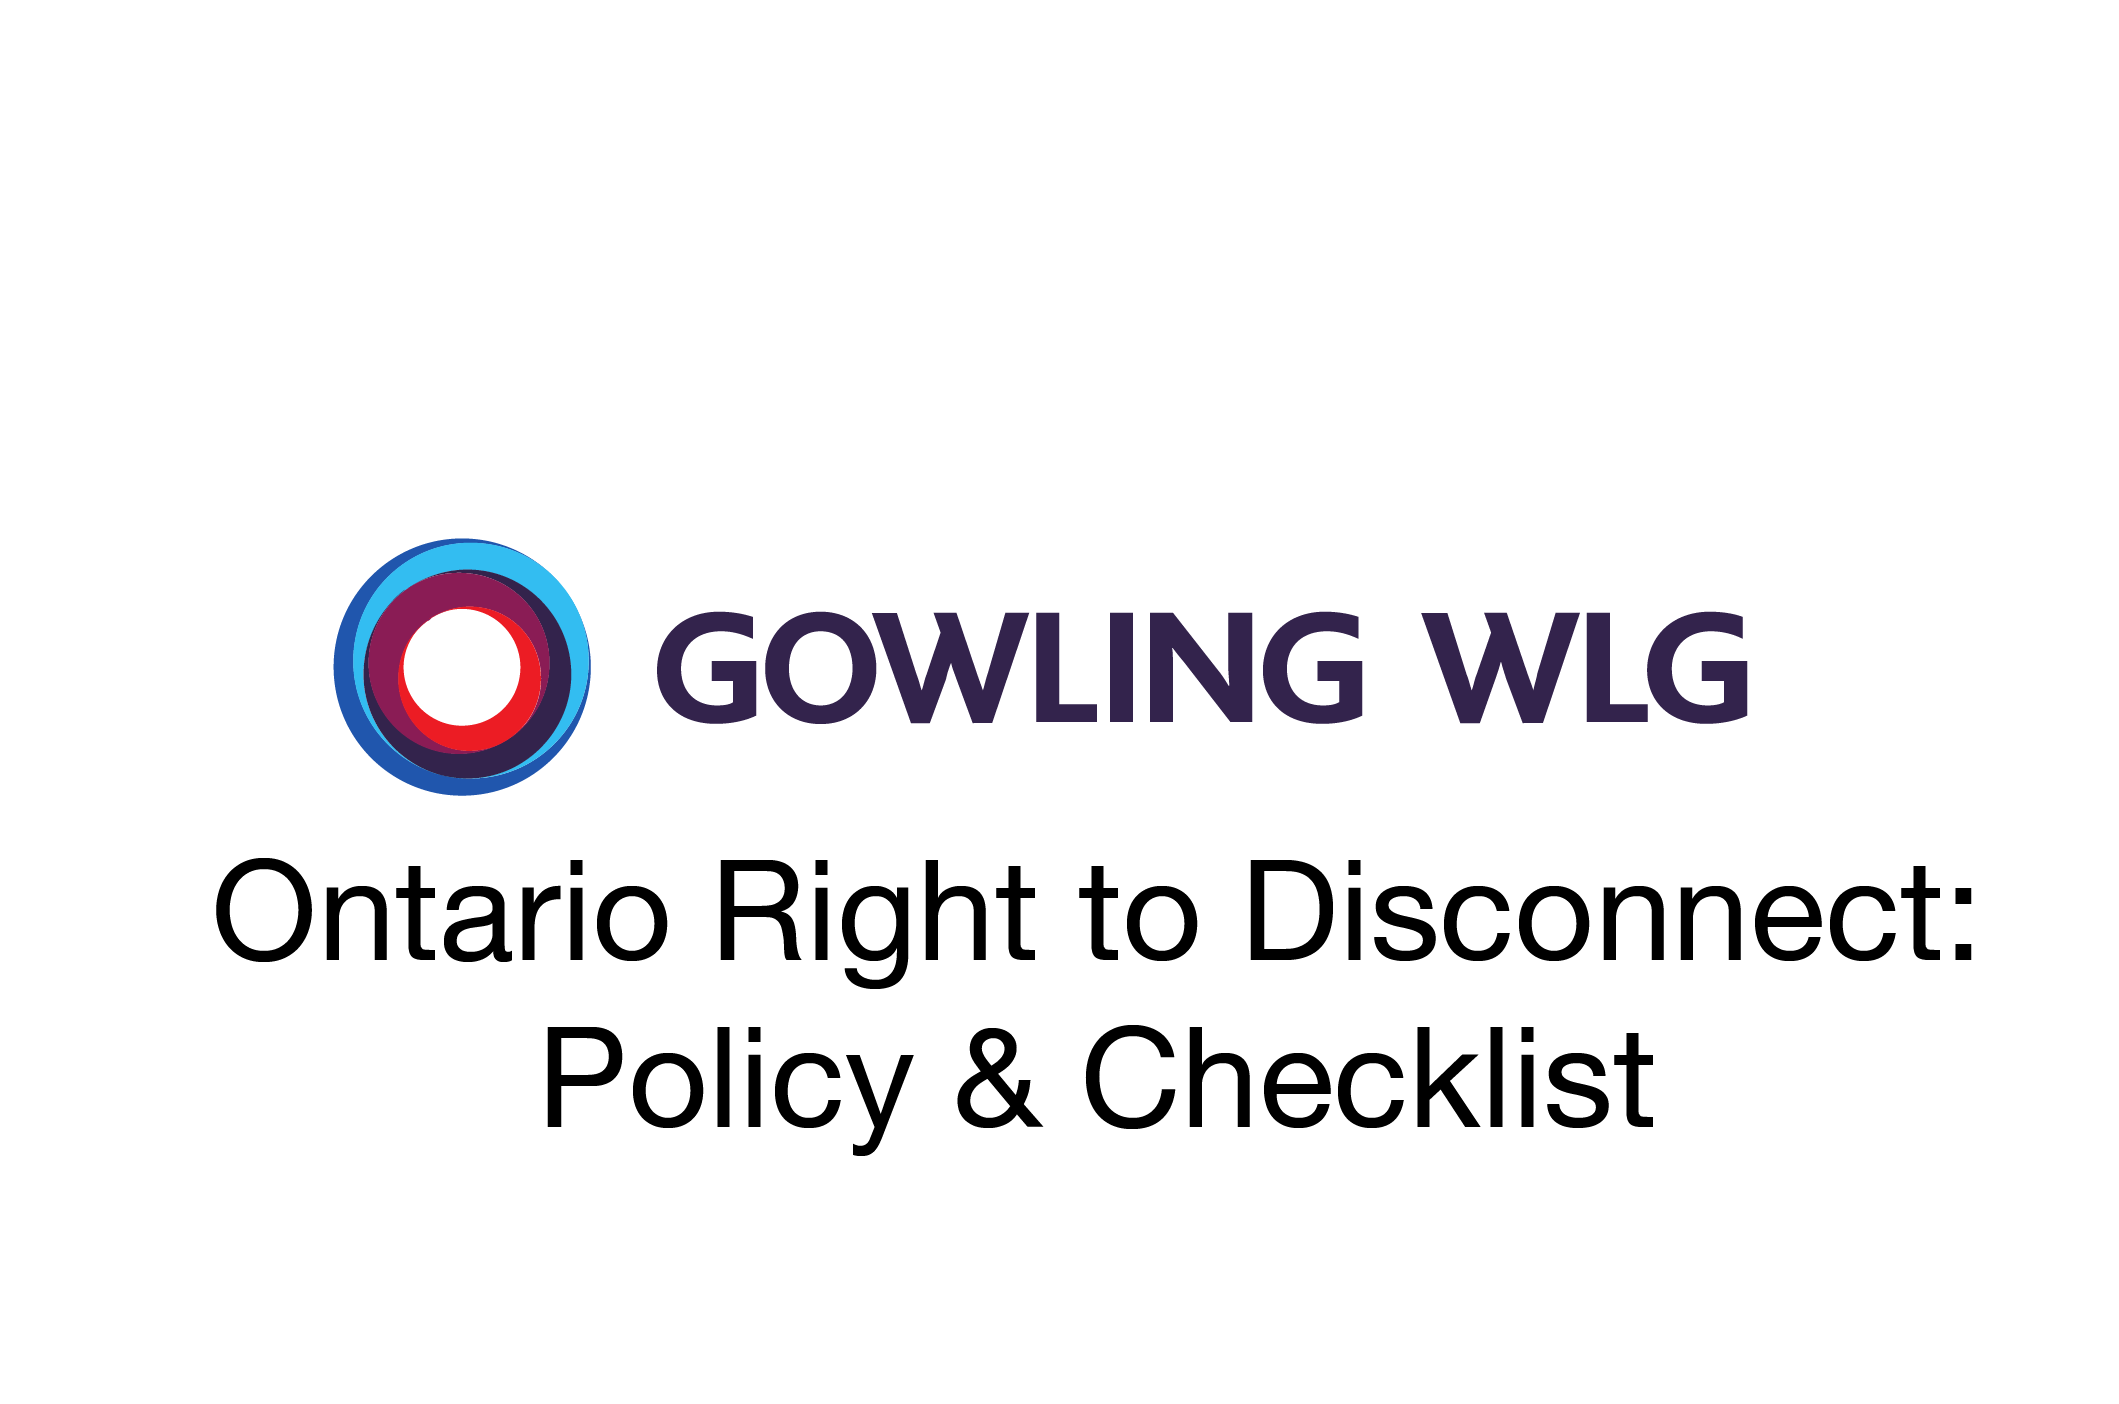 Gowling-logo-with-Ontario-Right-to-Disconnect-7-Apr-22-01